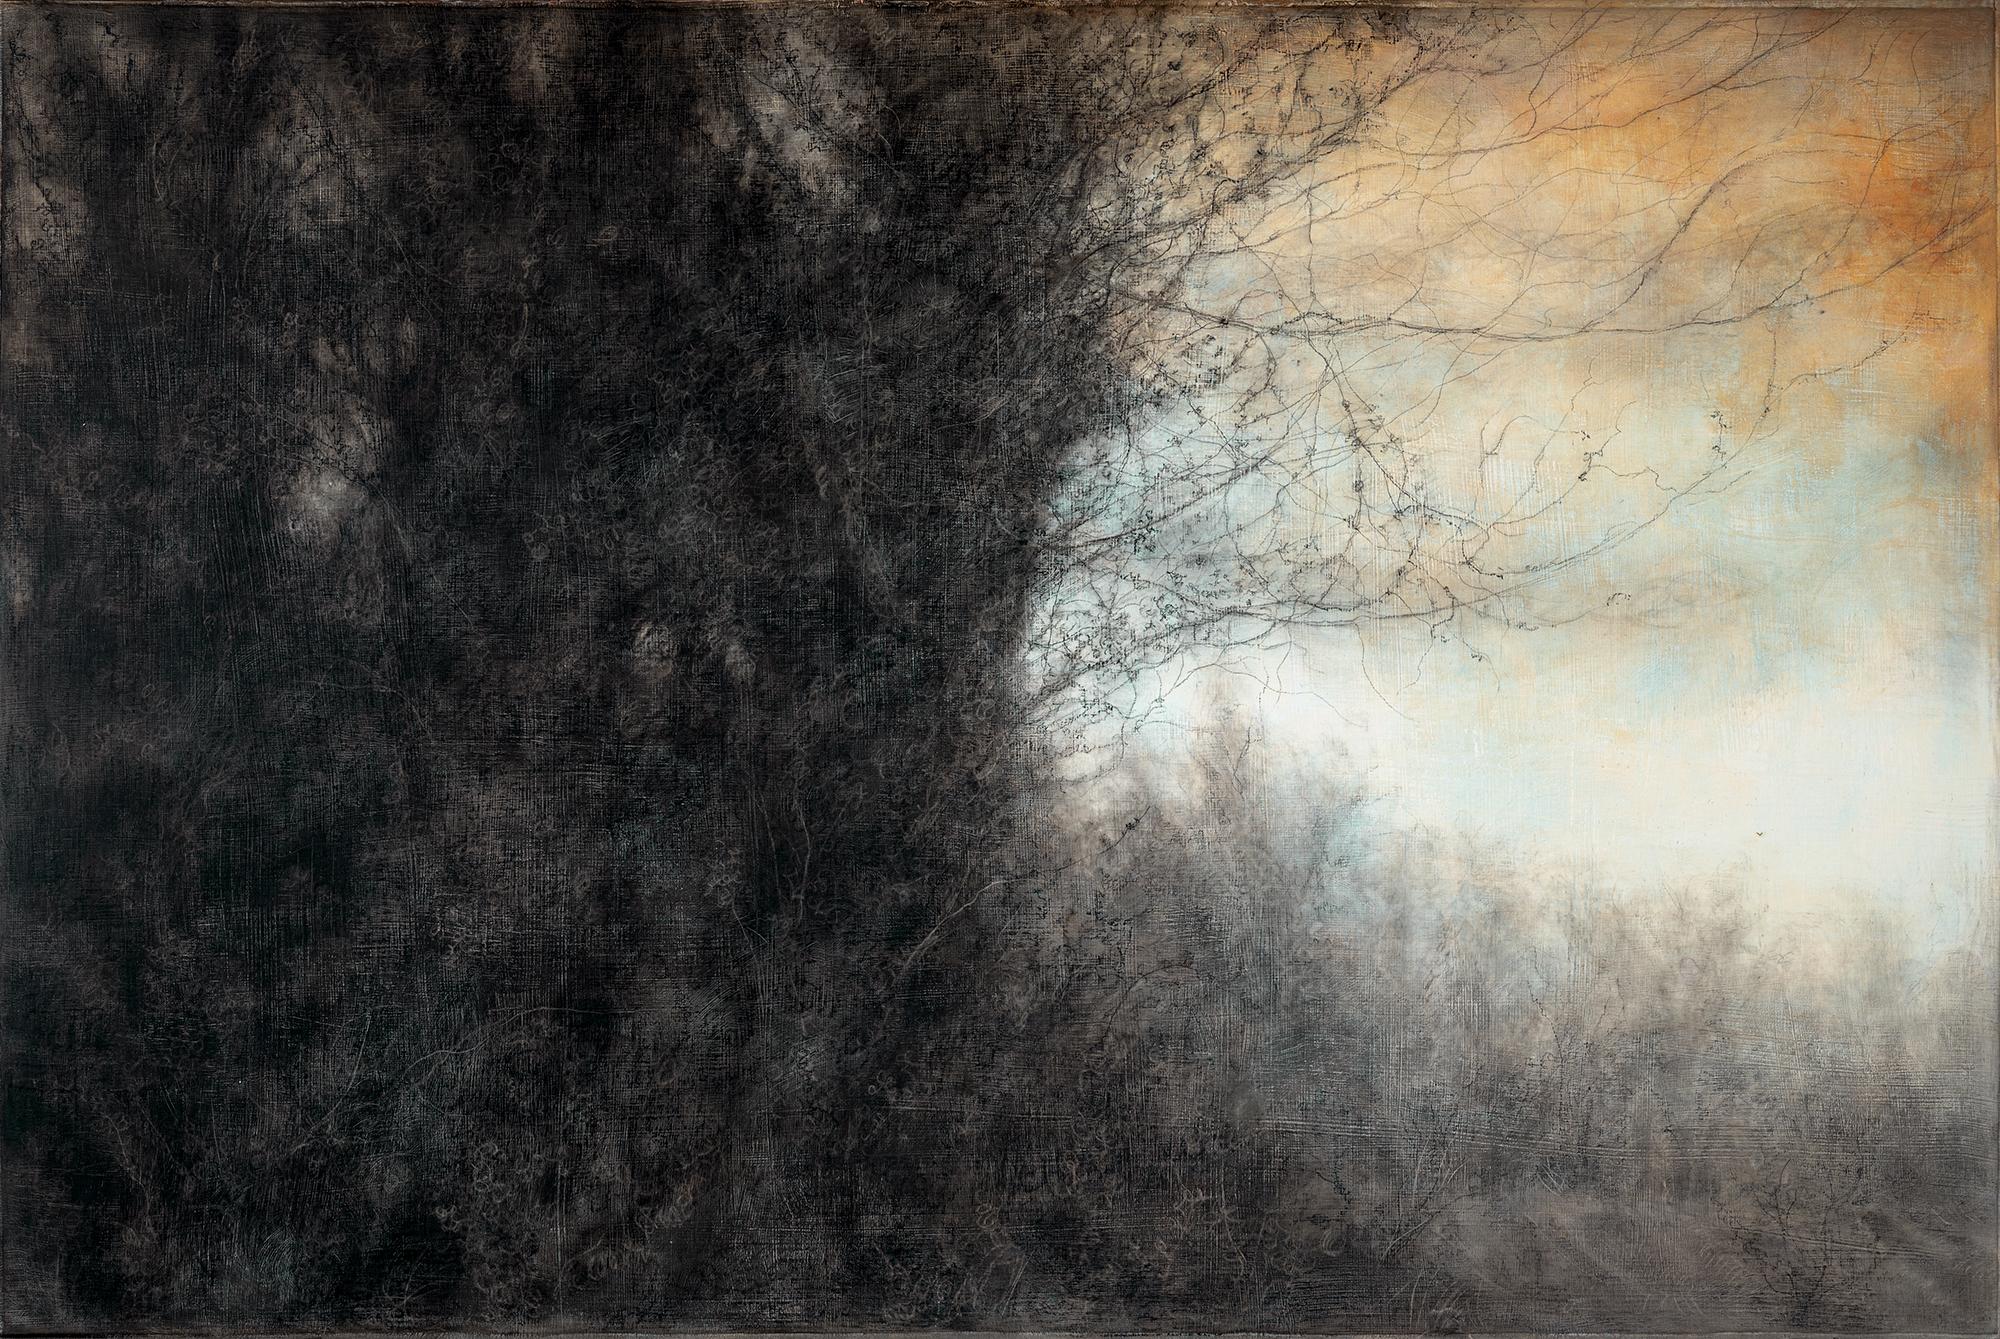 Swathe (Dramatic Contemporary Charcoal Drawing of Landscape with Pale Blue Sky)